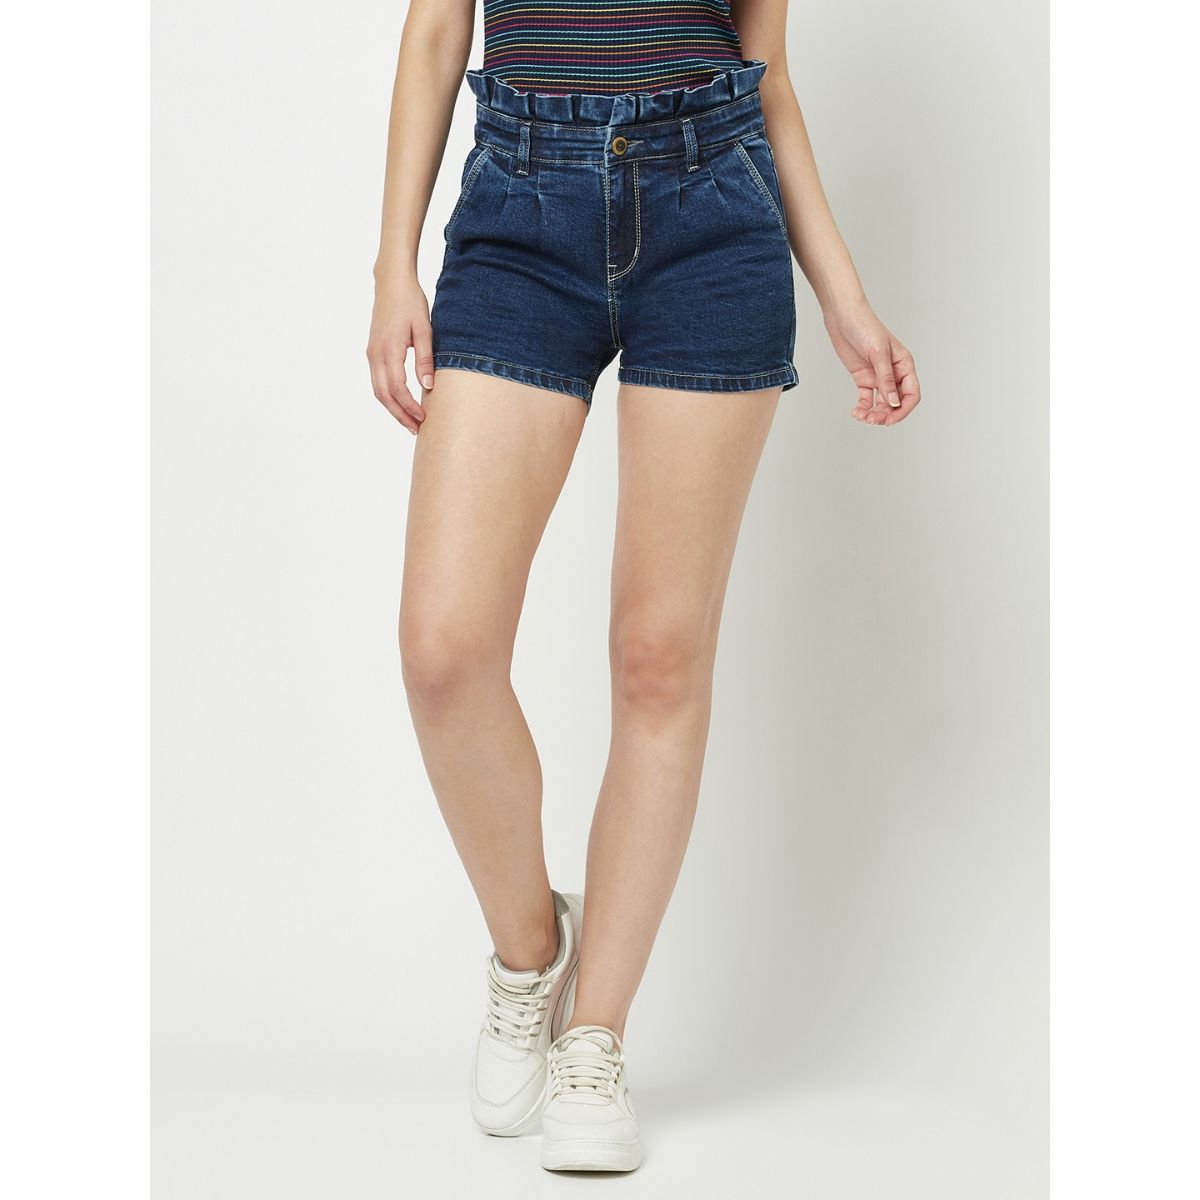 High Waisted Denim Shorts - Buy High Waisted Denim Shorts online at Best  Prices in India